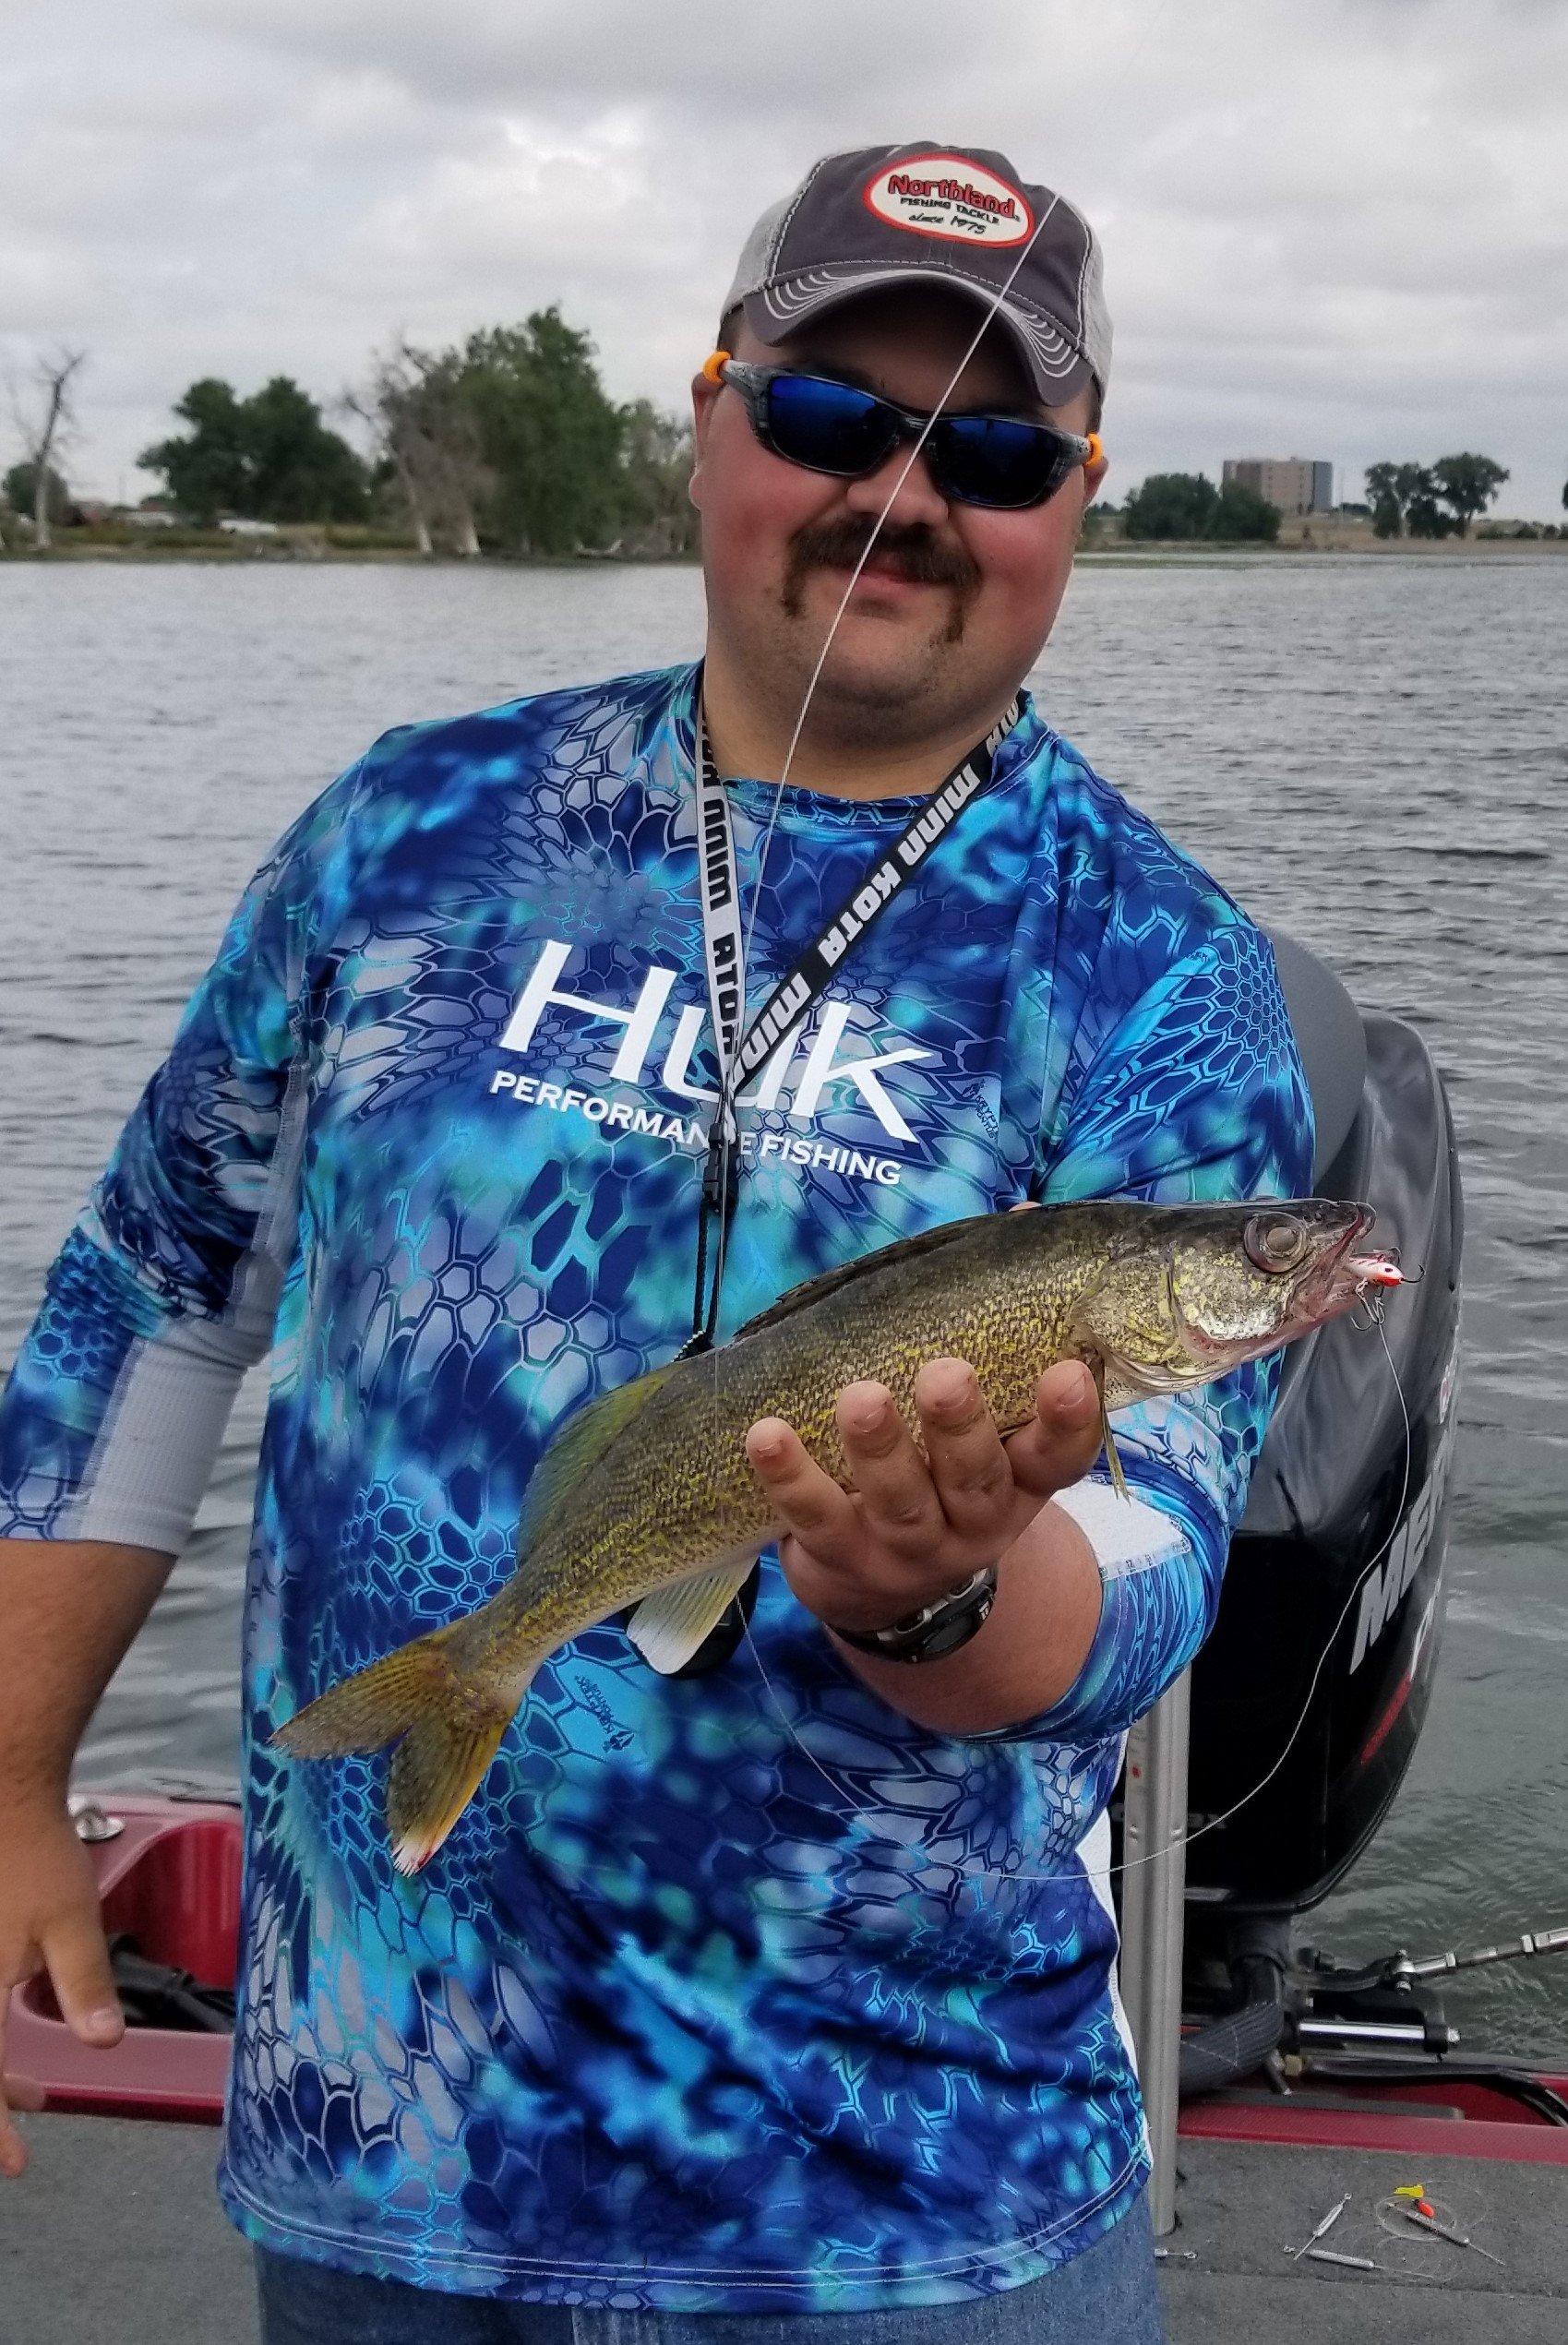 Fisherman with a walleye he caught during the summer